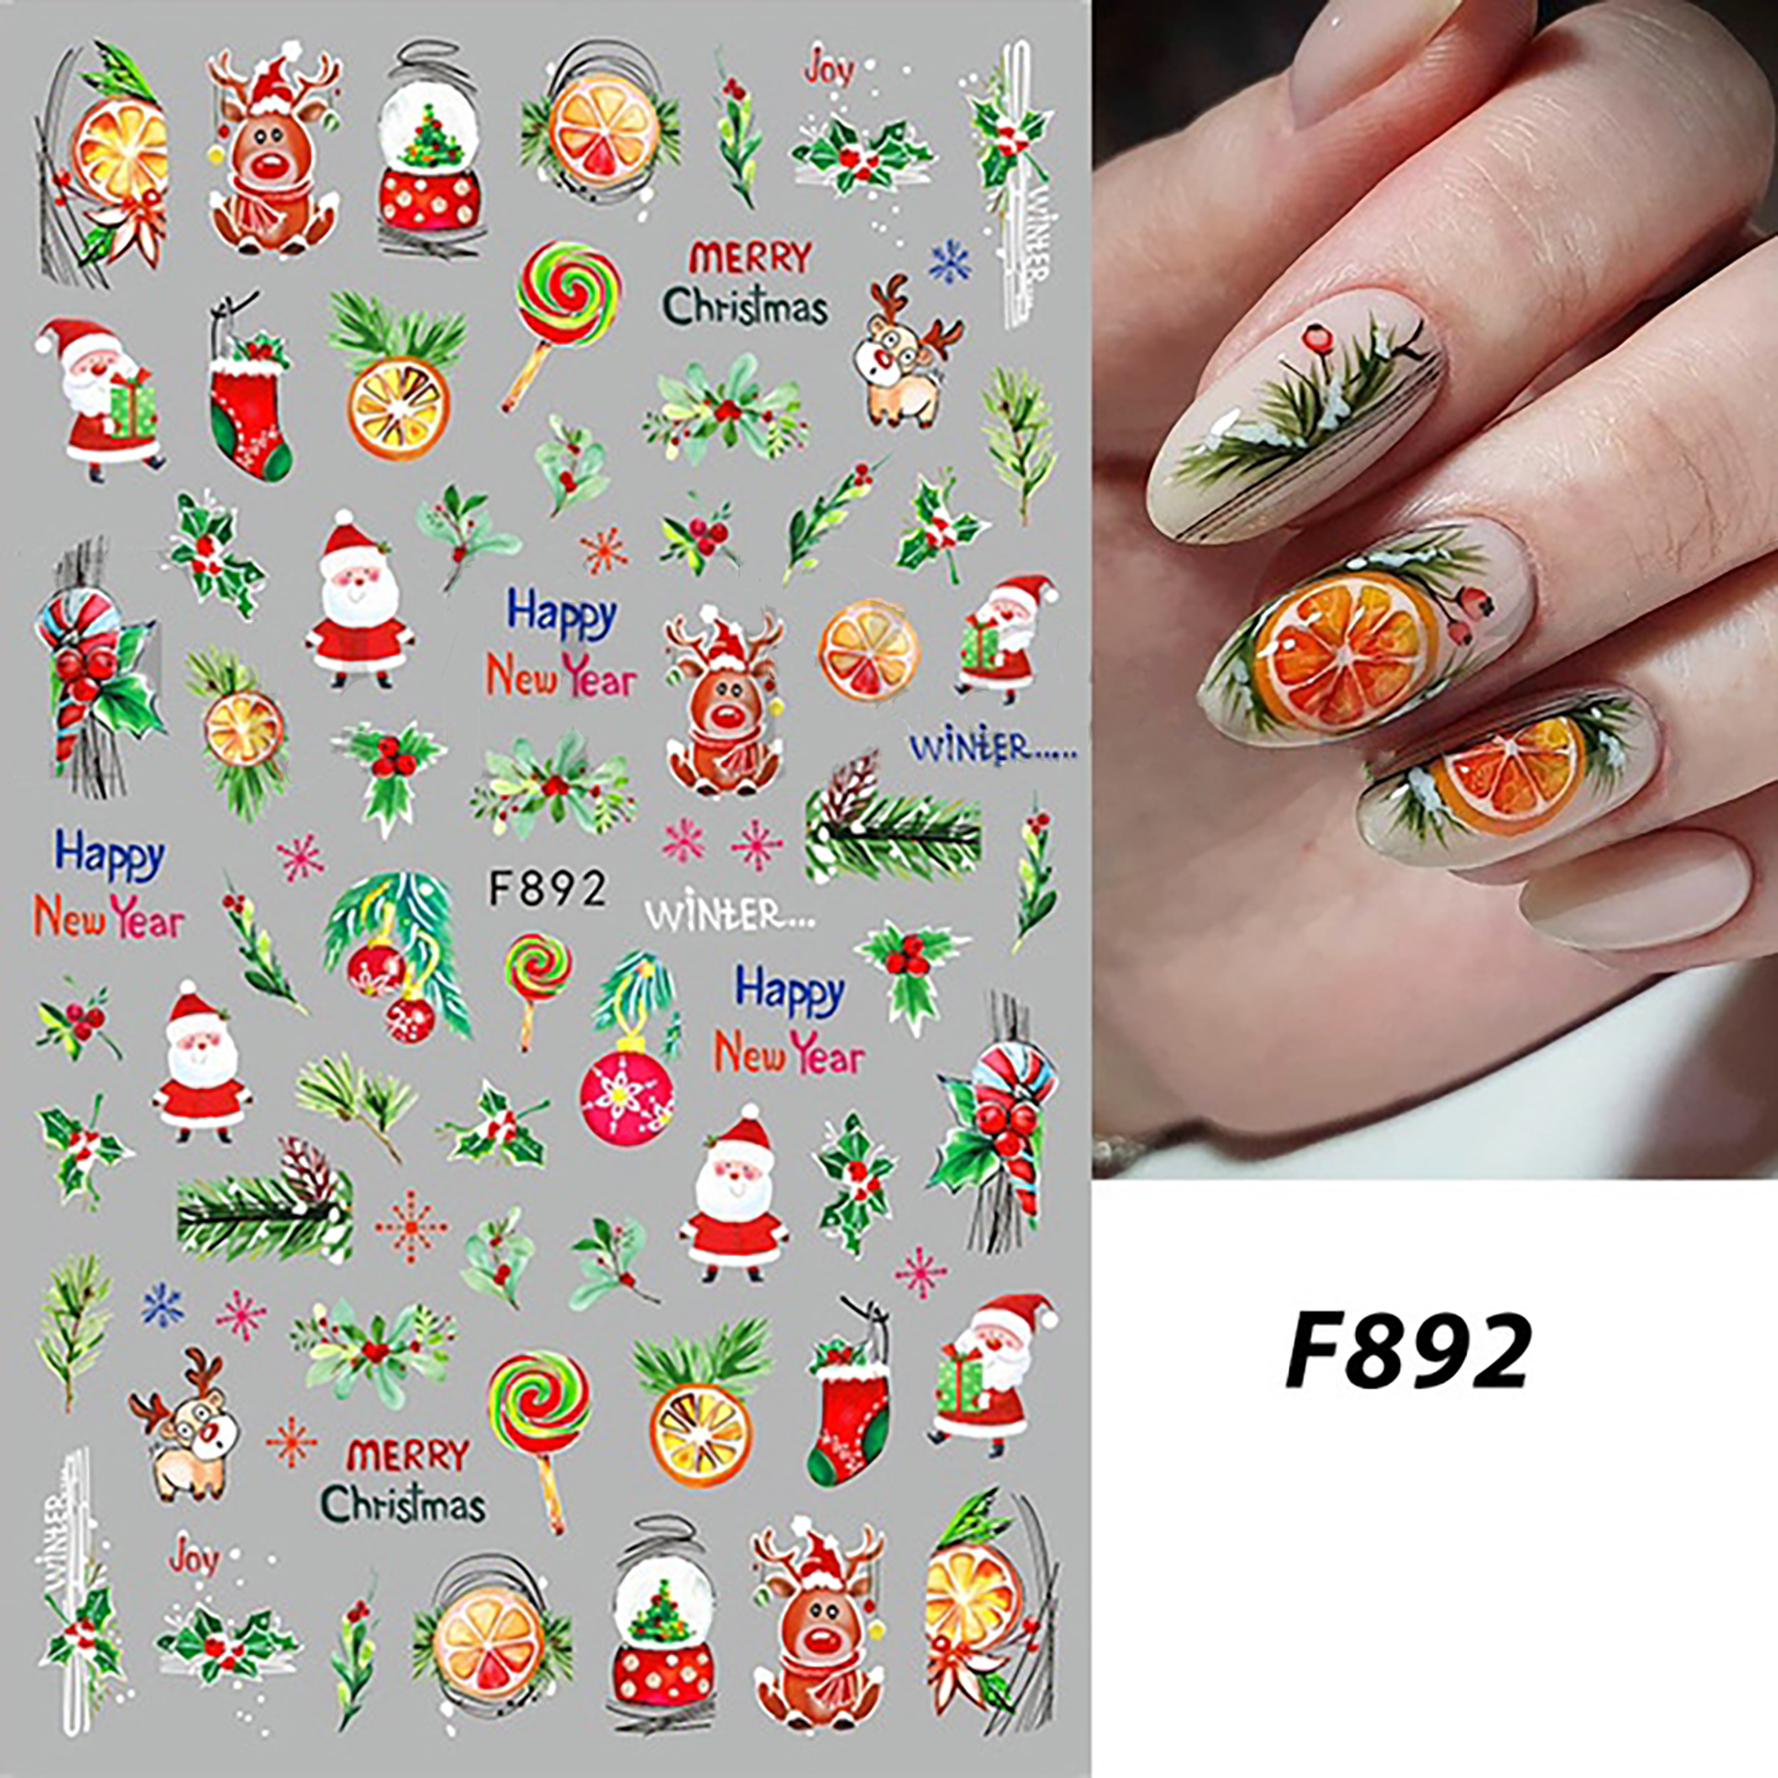 Fire Flame Ghost Face Ballerina Acrylic Nails Designs Fashionable Y2K Nail  Art Stickers In Pink, Black, And White Popular Whole Sale Nailing  Accessories X0822 From Konig_albert, $5.85 | DHgate.Com